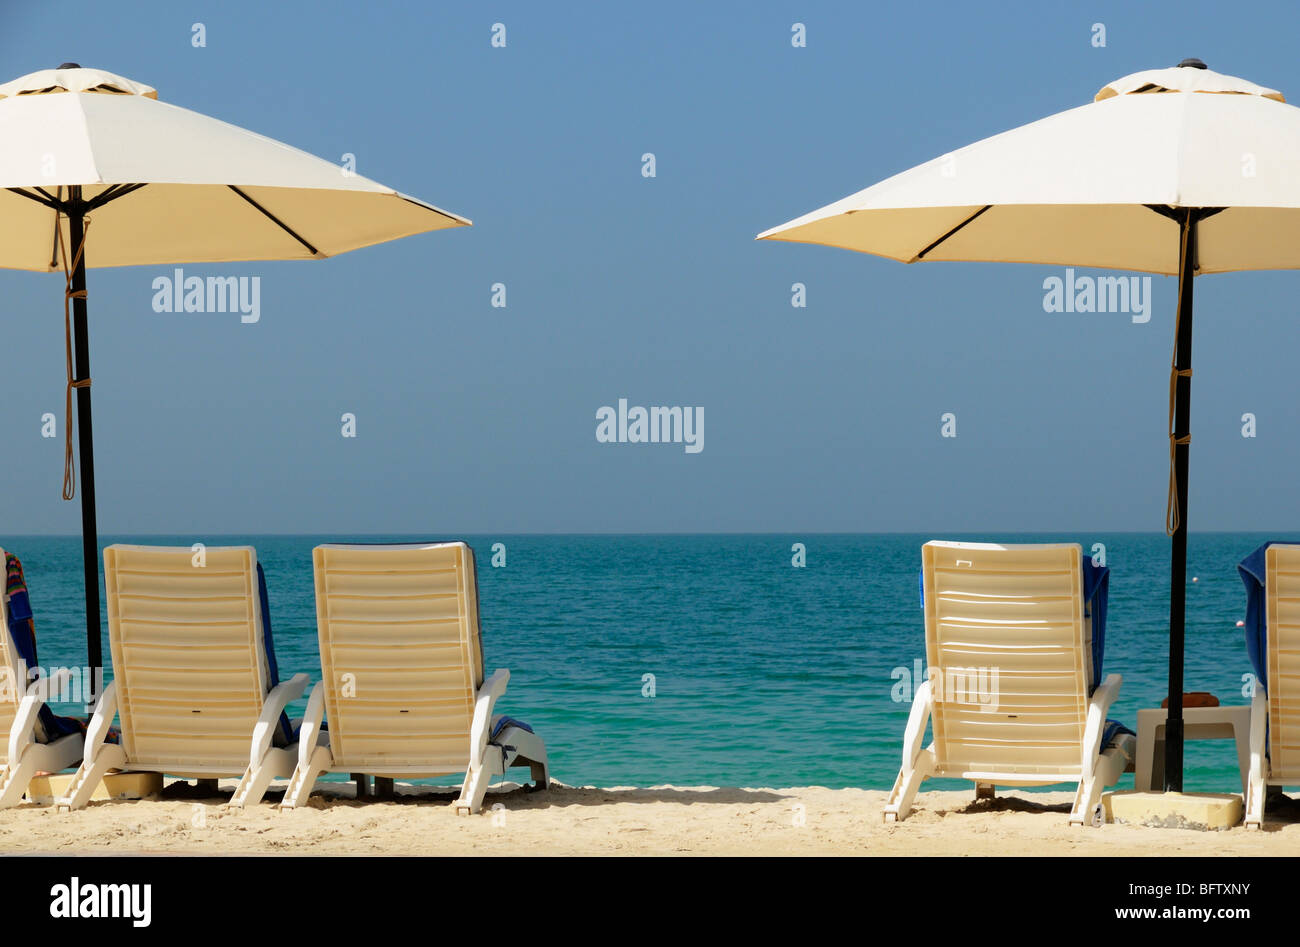 Private Hotel Beach and Parasols at the waterfront, Ras al Khaimah, UAE Stock Photo